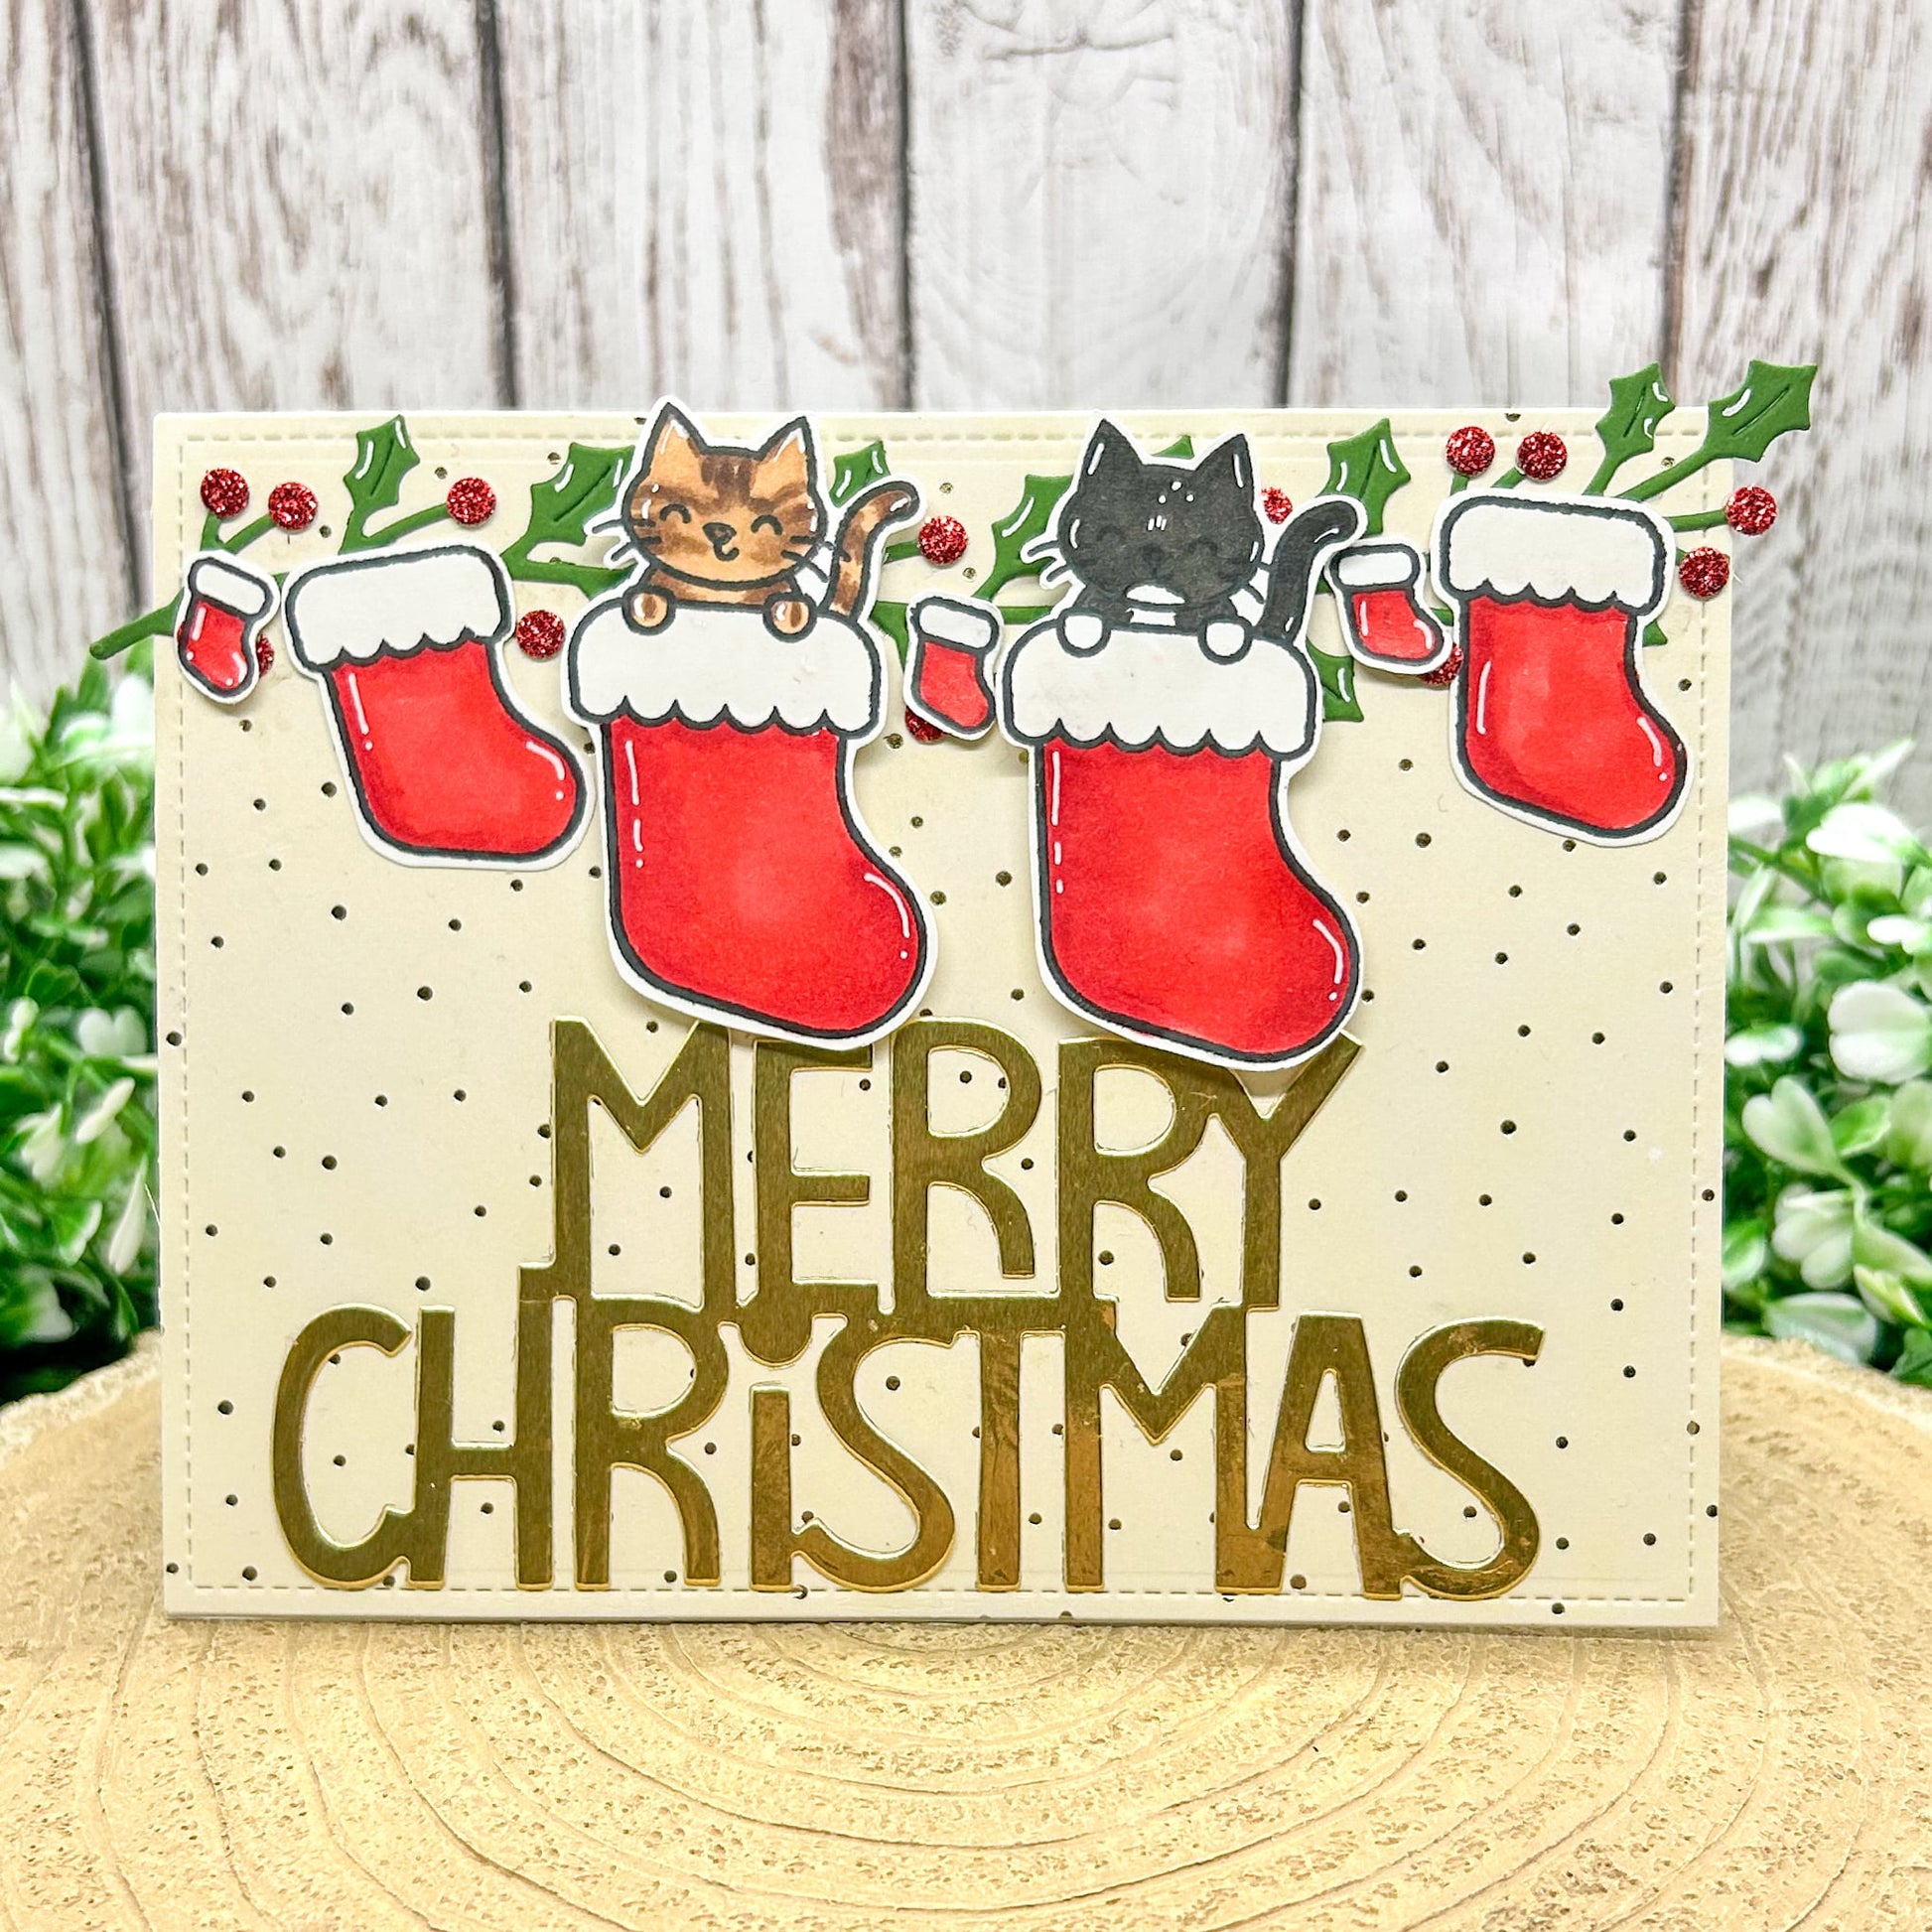 Cats In Stockings Handmade Christmas Card